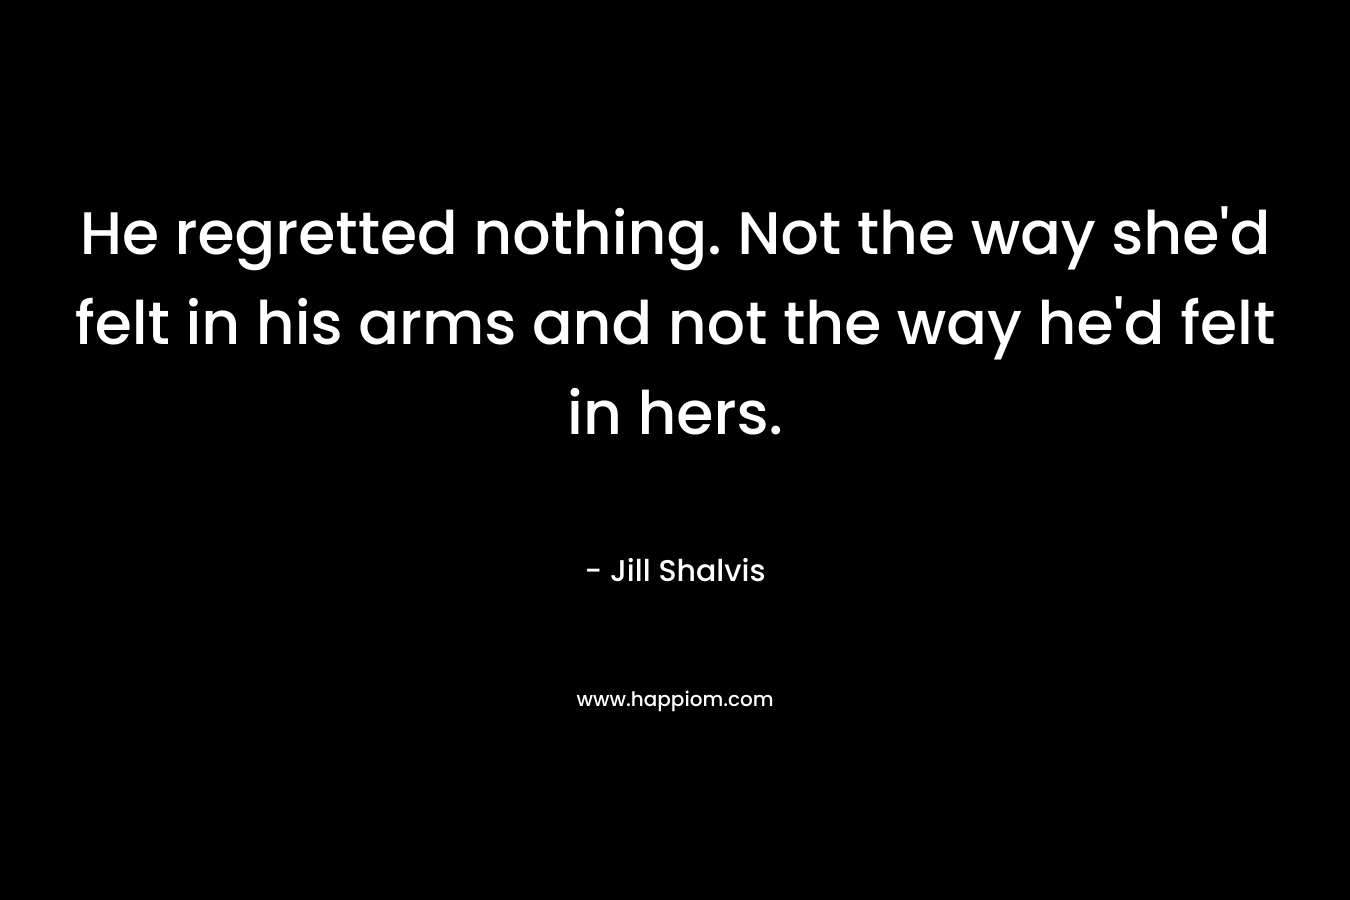 He regretted nothing. Not the way she’d felt in his arms and not the way he’d felt in hers. – Jill Shalvis